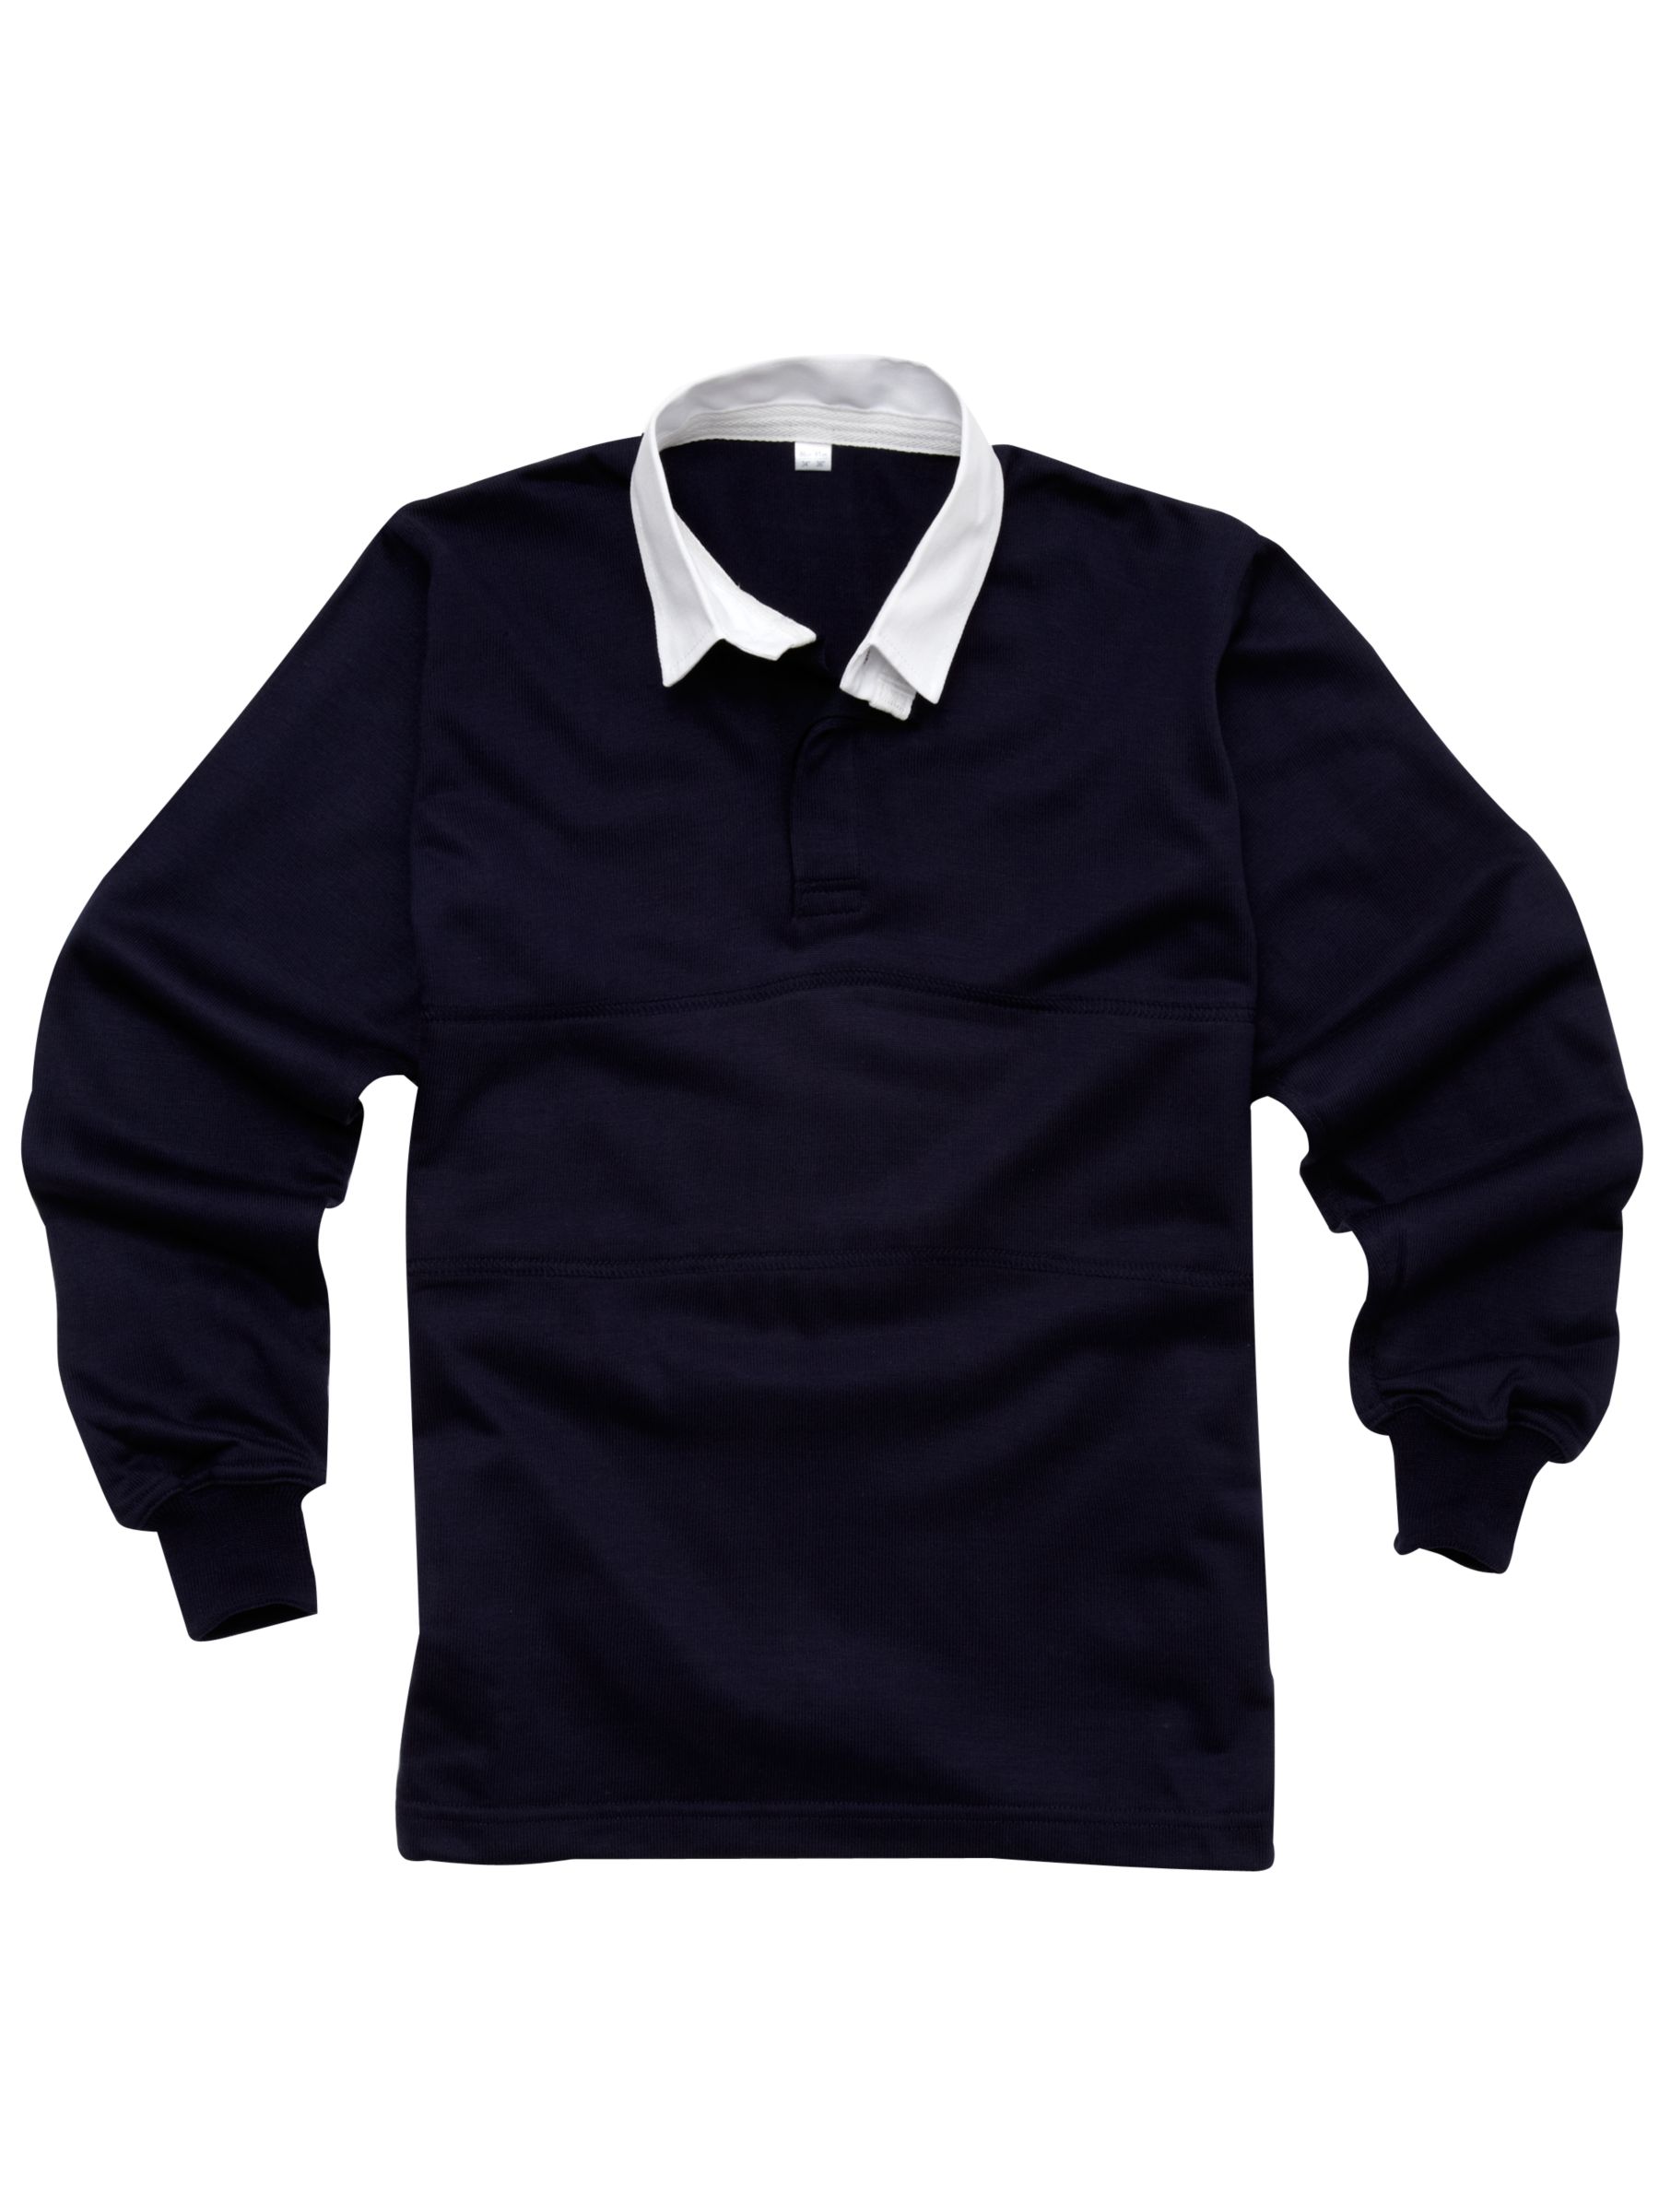 Other Schools School Boys Rugby Shirt, Navy/Yellow